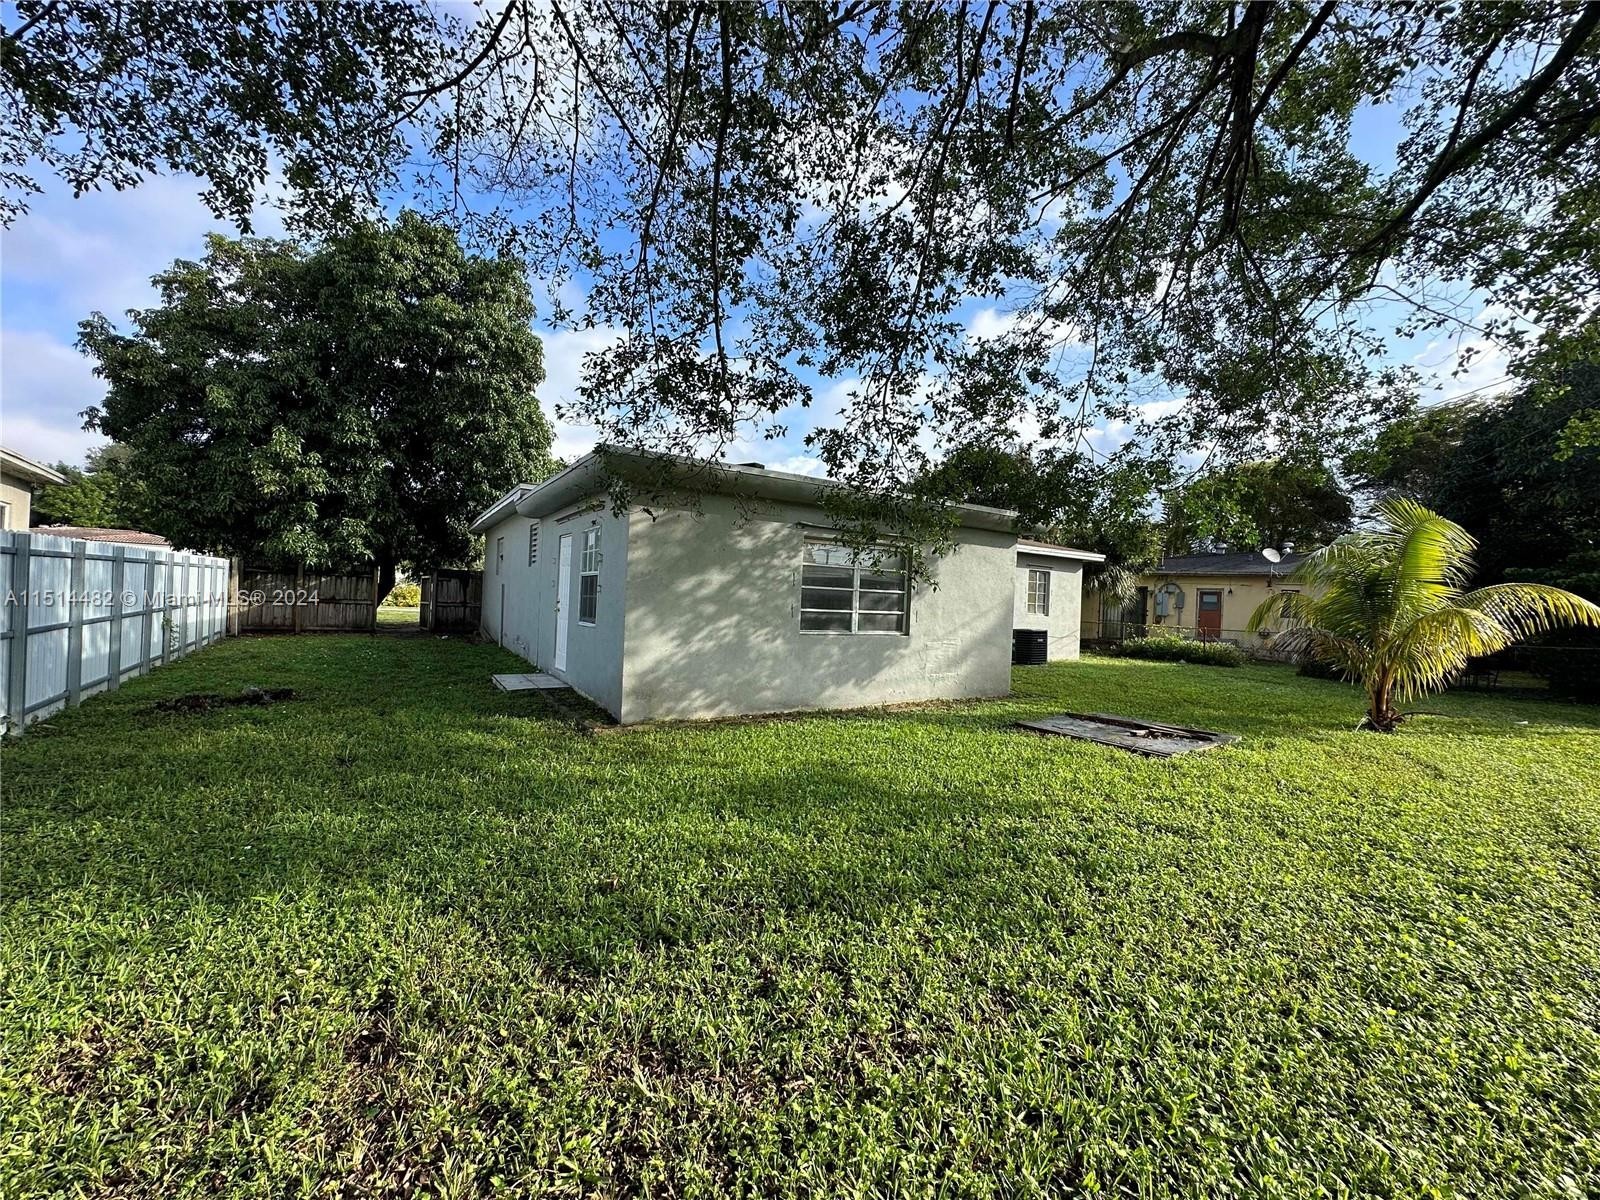 14. 510 NW 152nd St